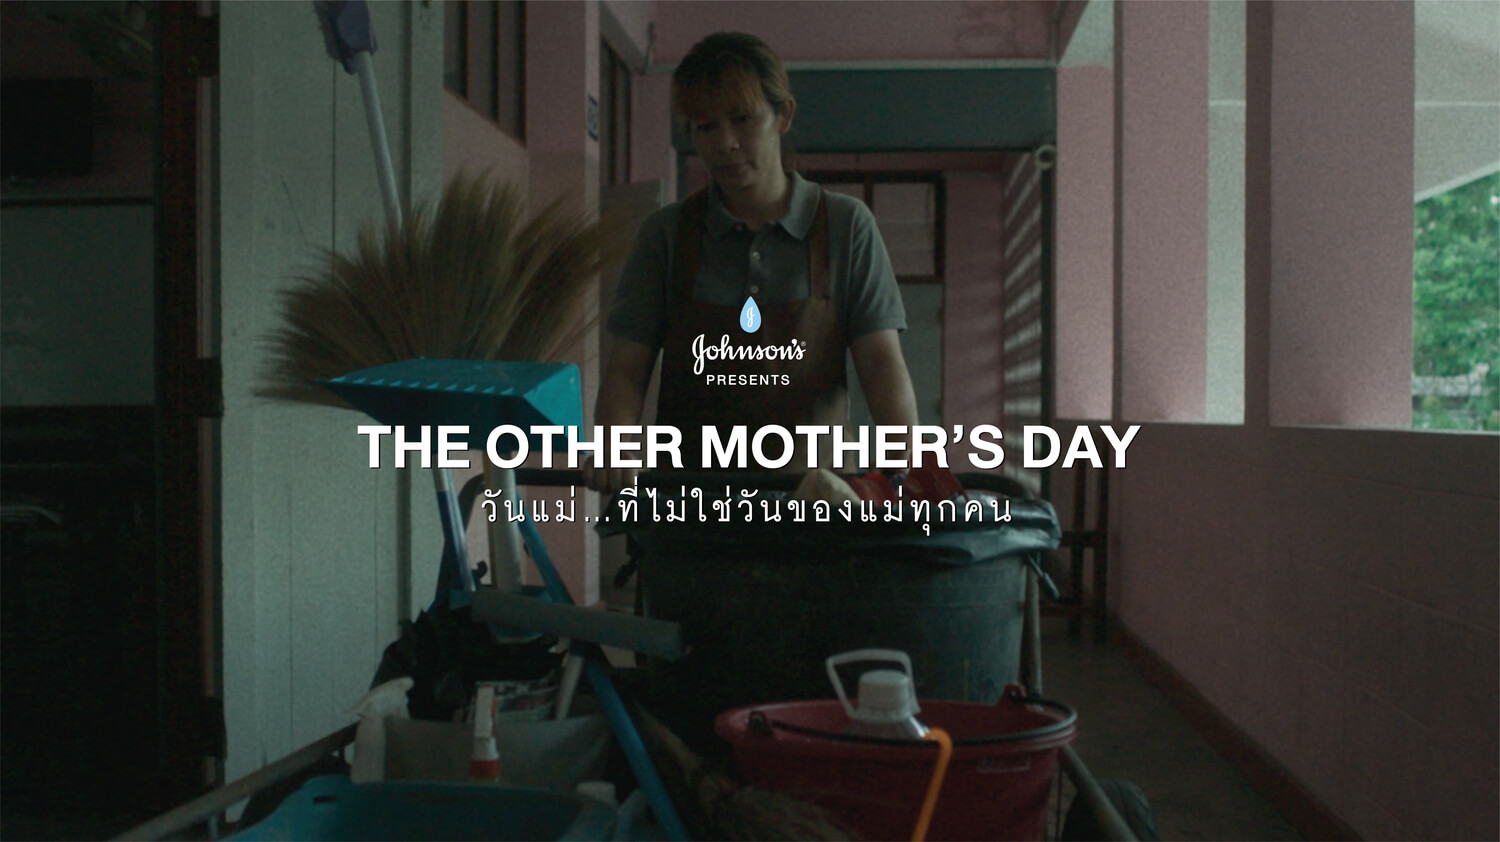 The Other Mother's Day by Johnson's Baby - #HeartOfAMom